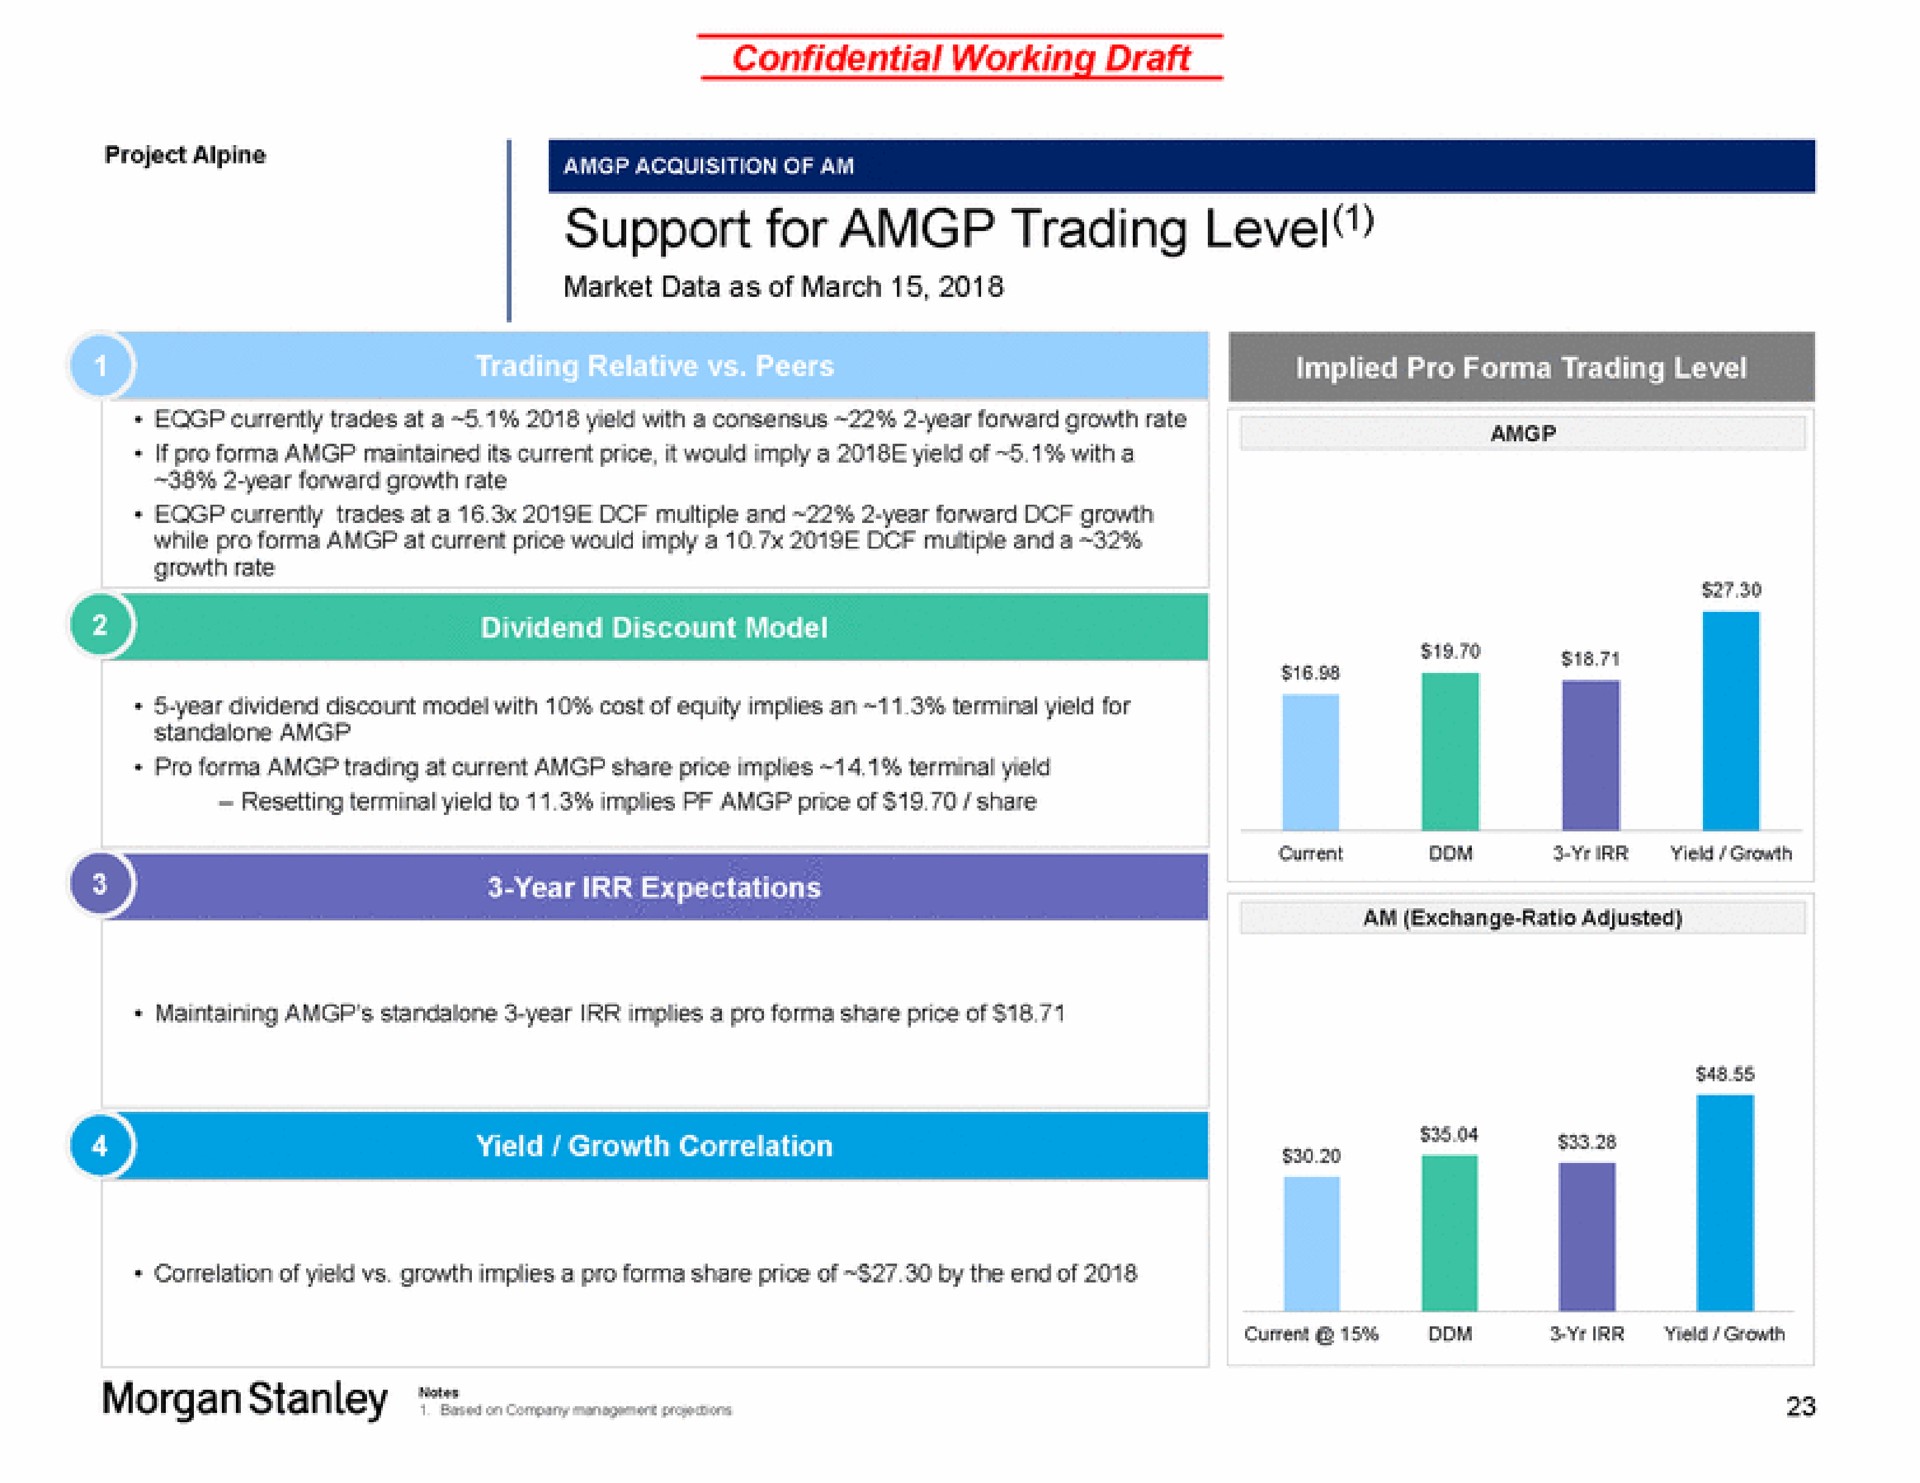 support for trading level | Morgan Stanley